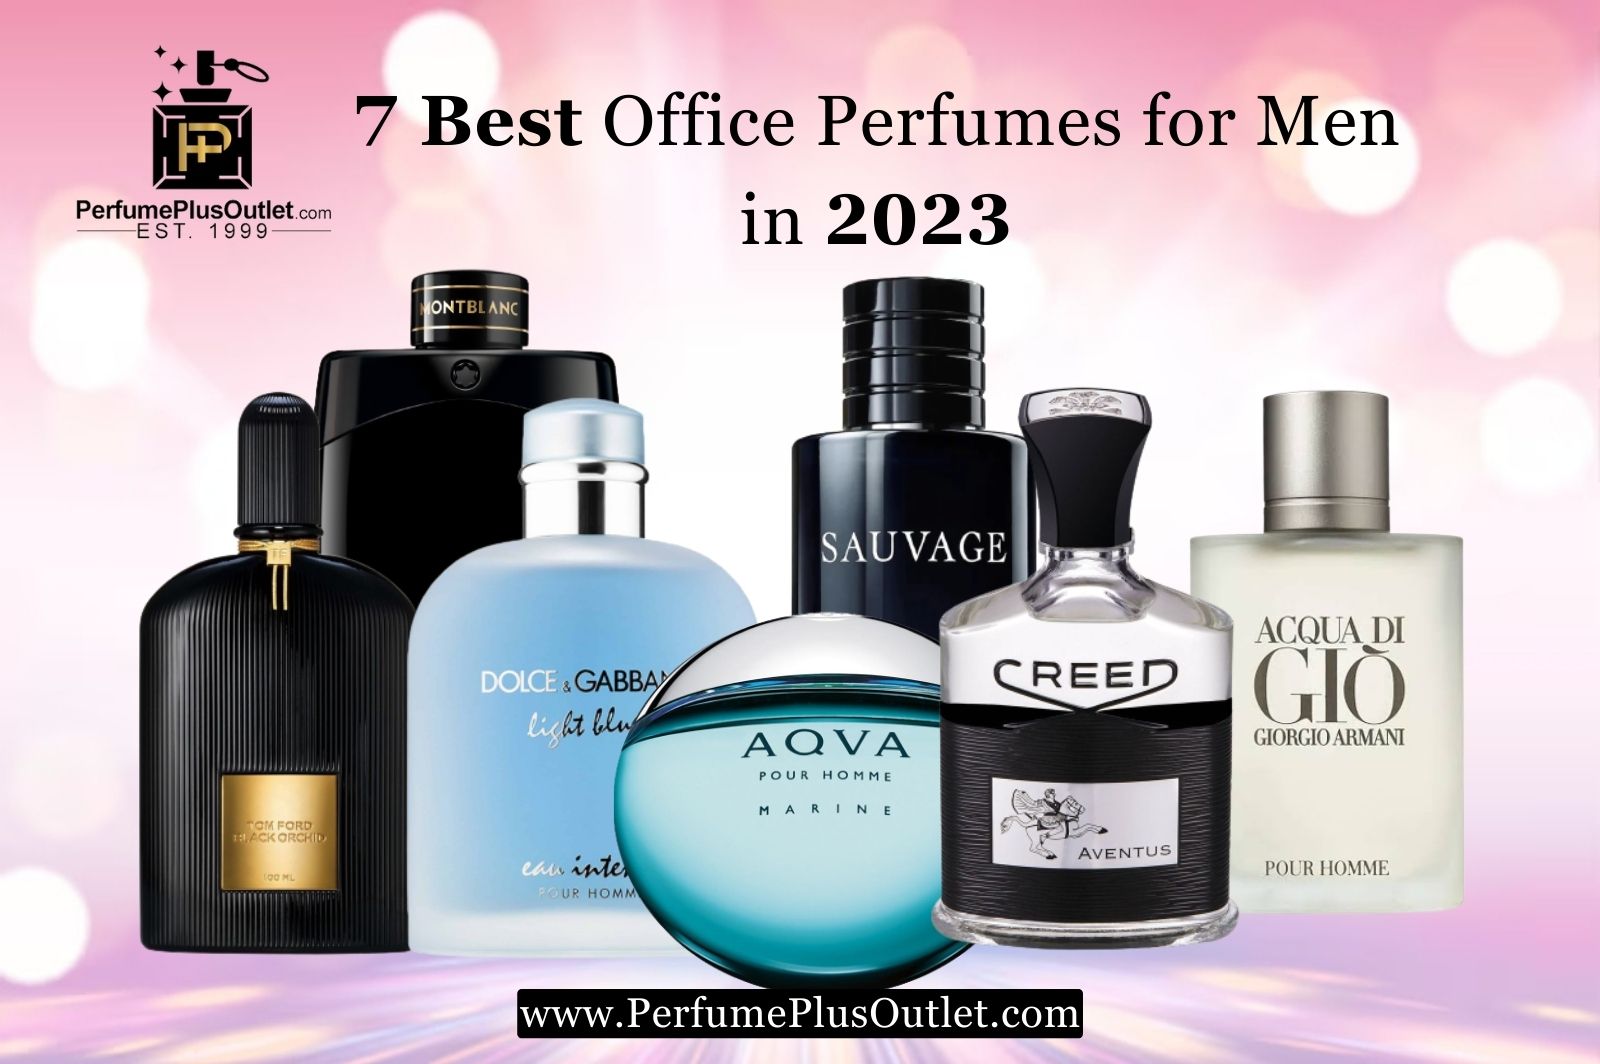 7 Best Office Perfumes for Men in 2023